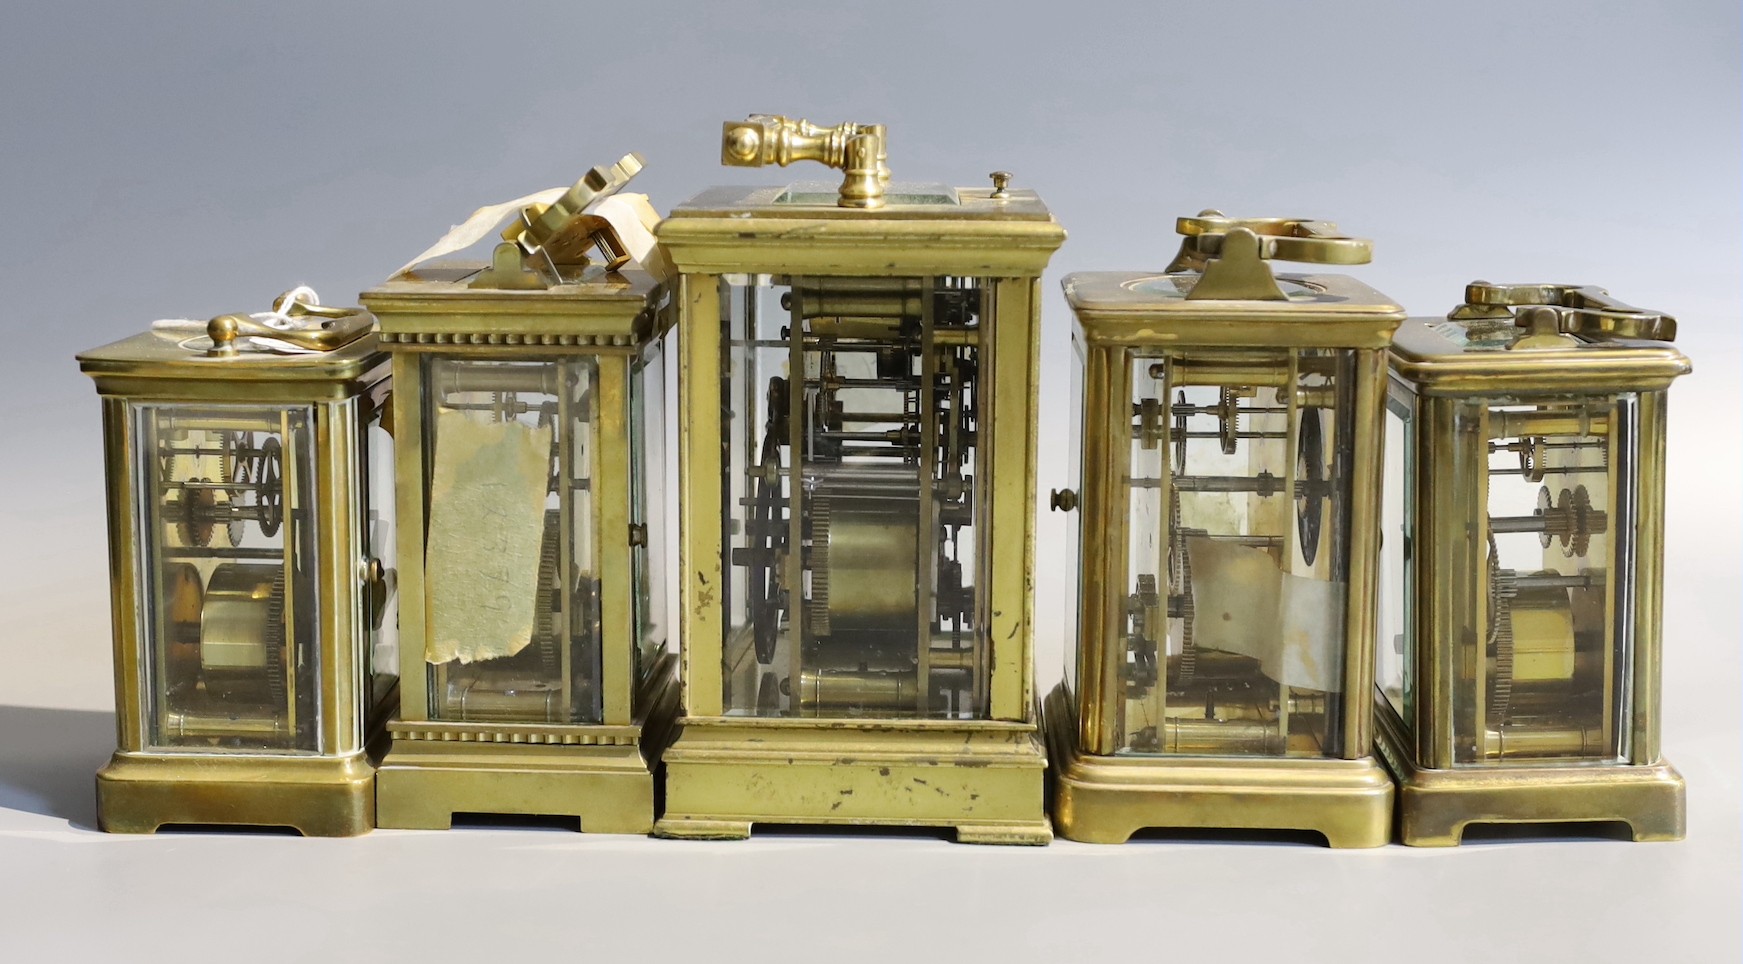 Five early 20th century and later lacquered brass carriage clocks and timepieces, in varying states of repair